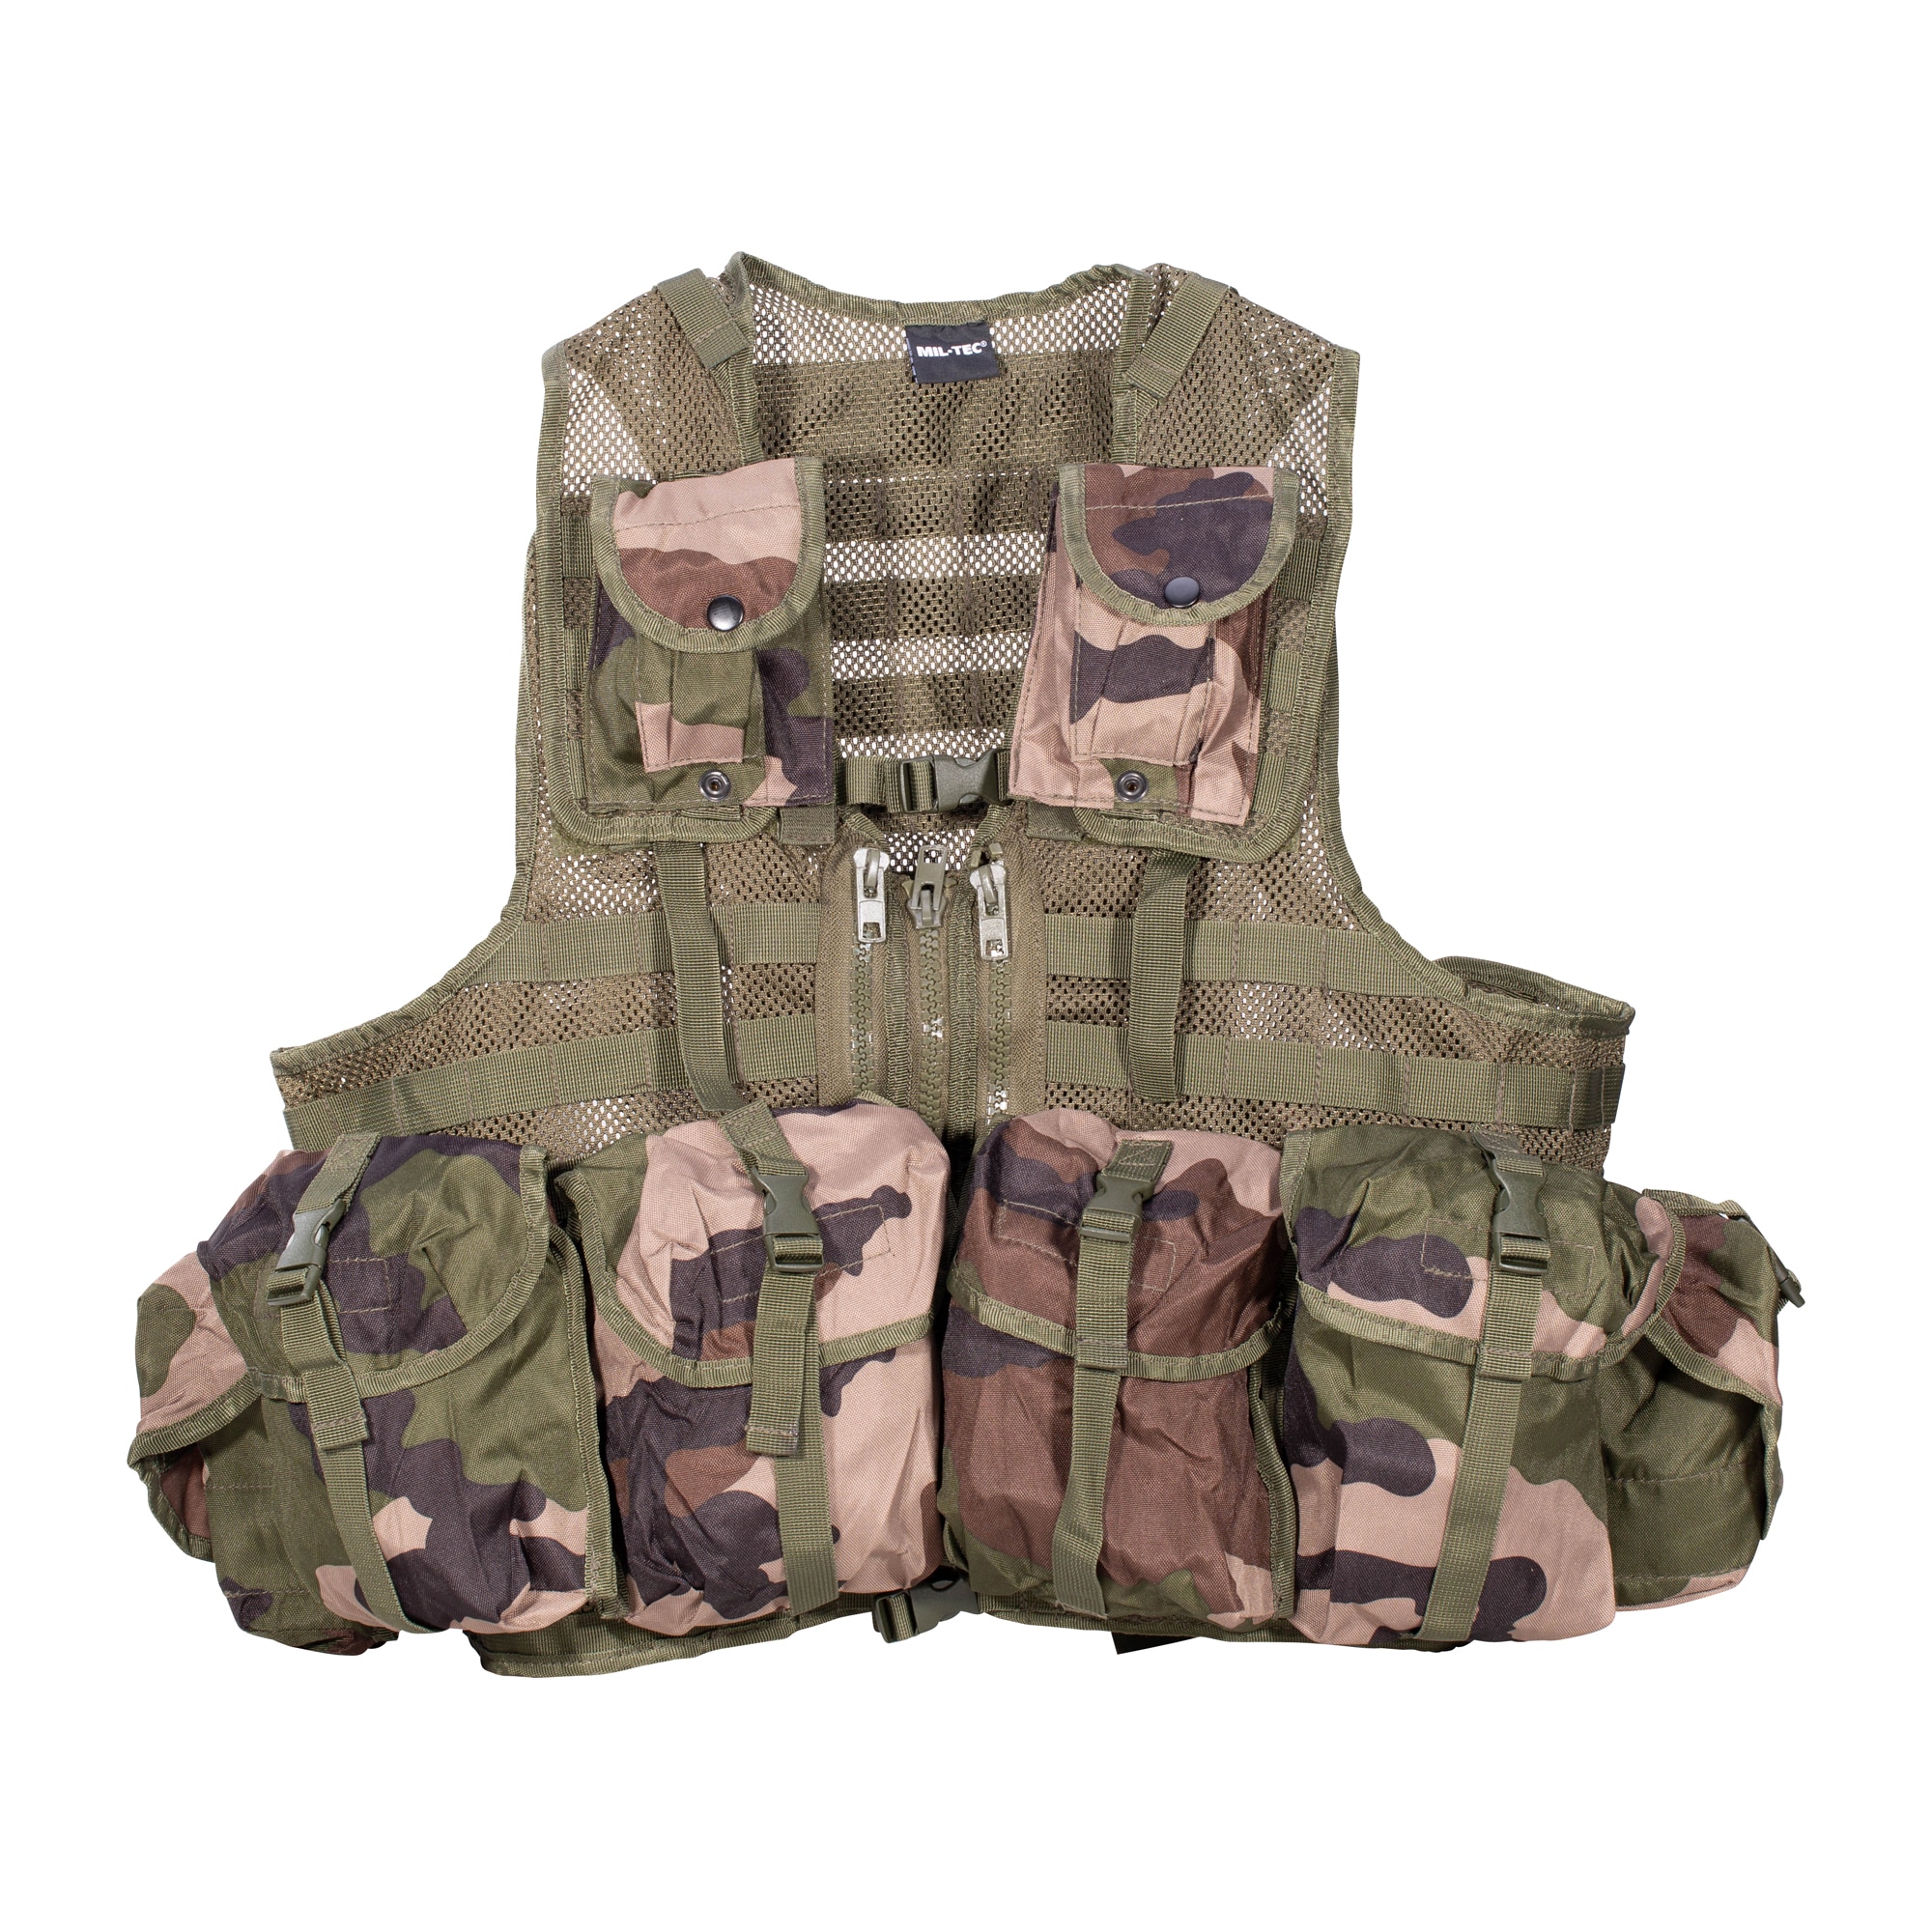 TACTICAL MILITARY ASSAULT VEST 9 POCKETS COMBAT WEBBING CARRIER FRENCH CCE CAMO 